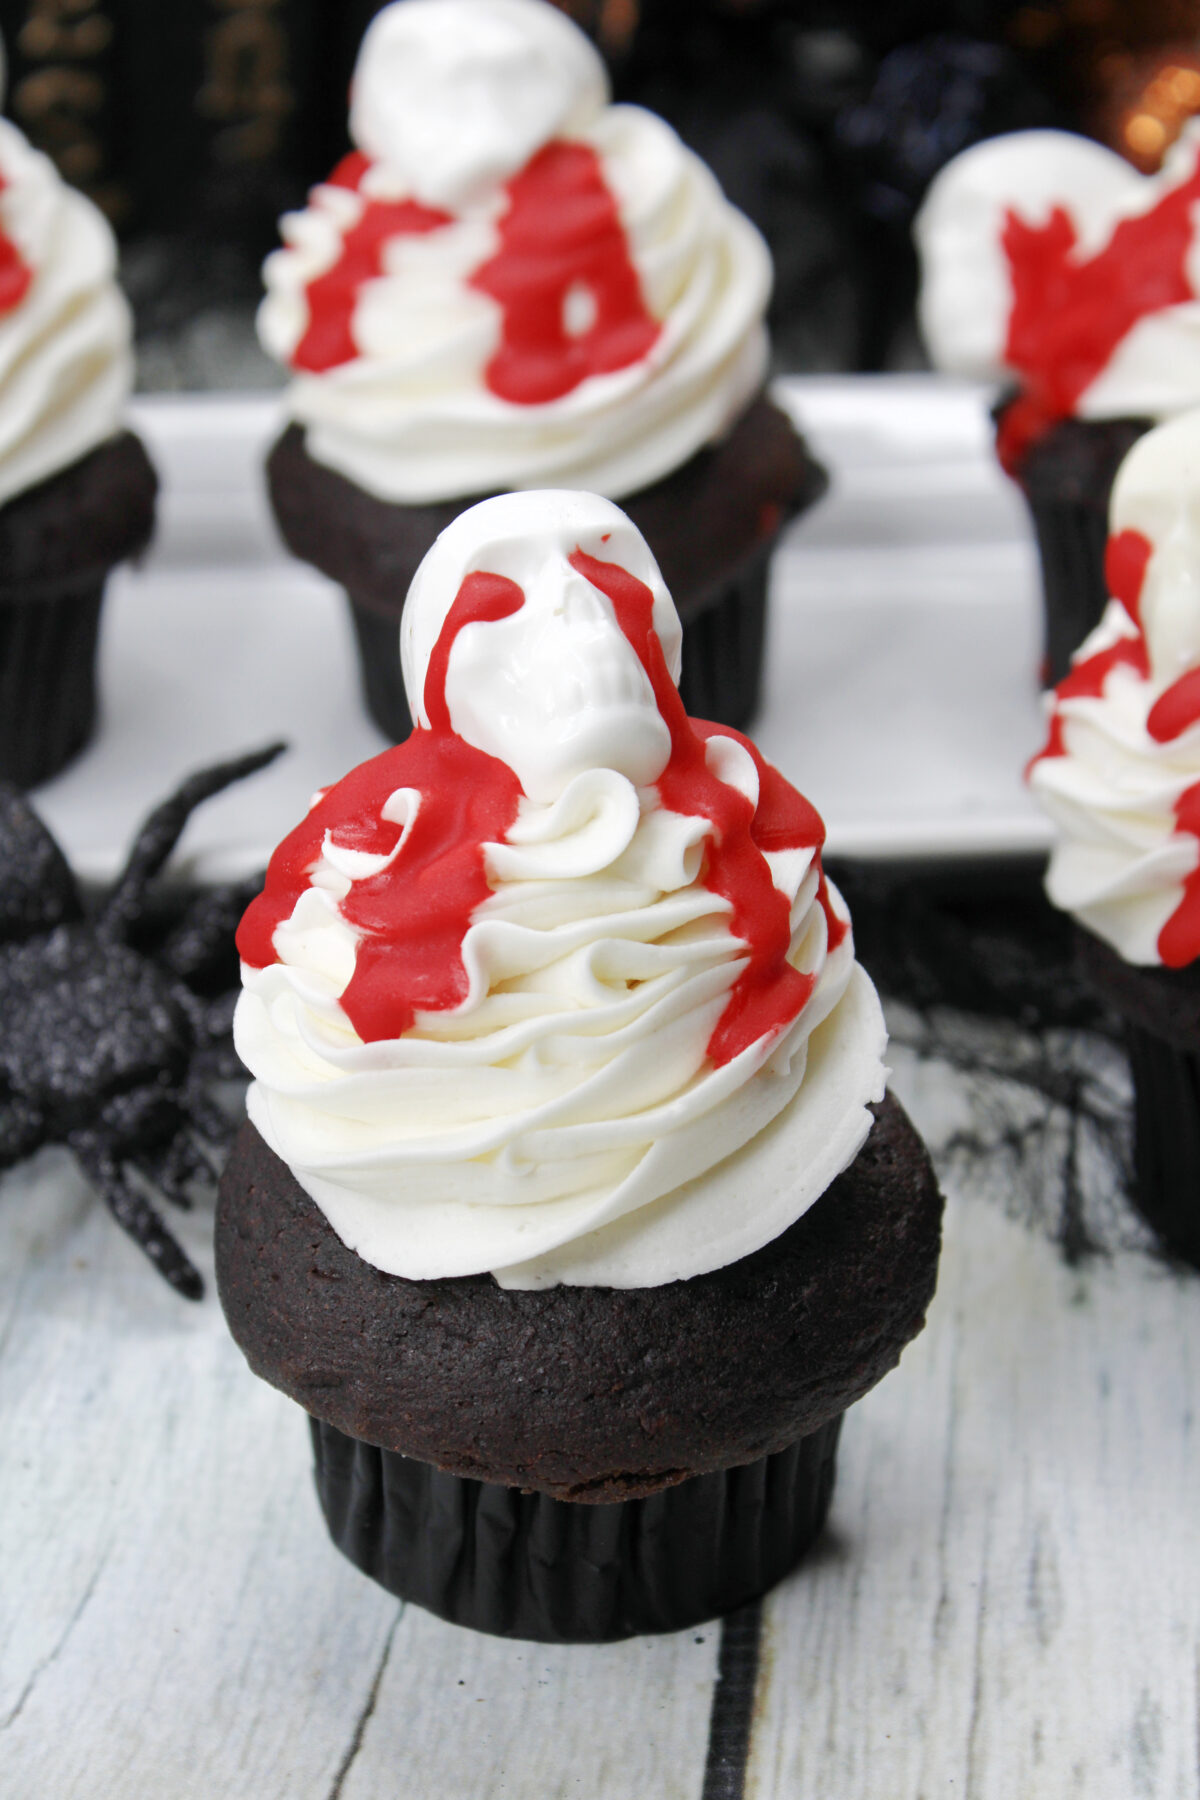 Get into the spirit of Halloween with this spooky treat! Learn to make Bloody Skull Cupcakes using simple ingredients with this easy recipe!